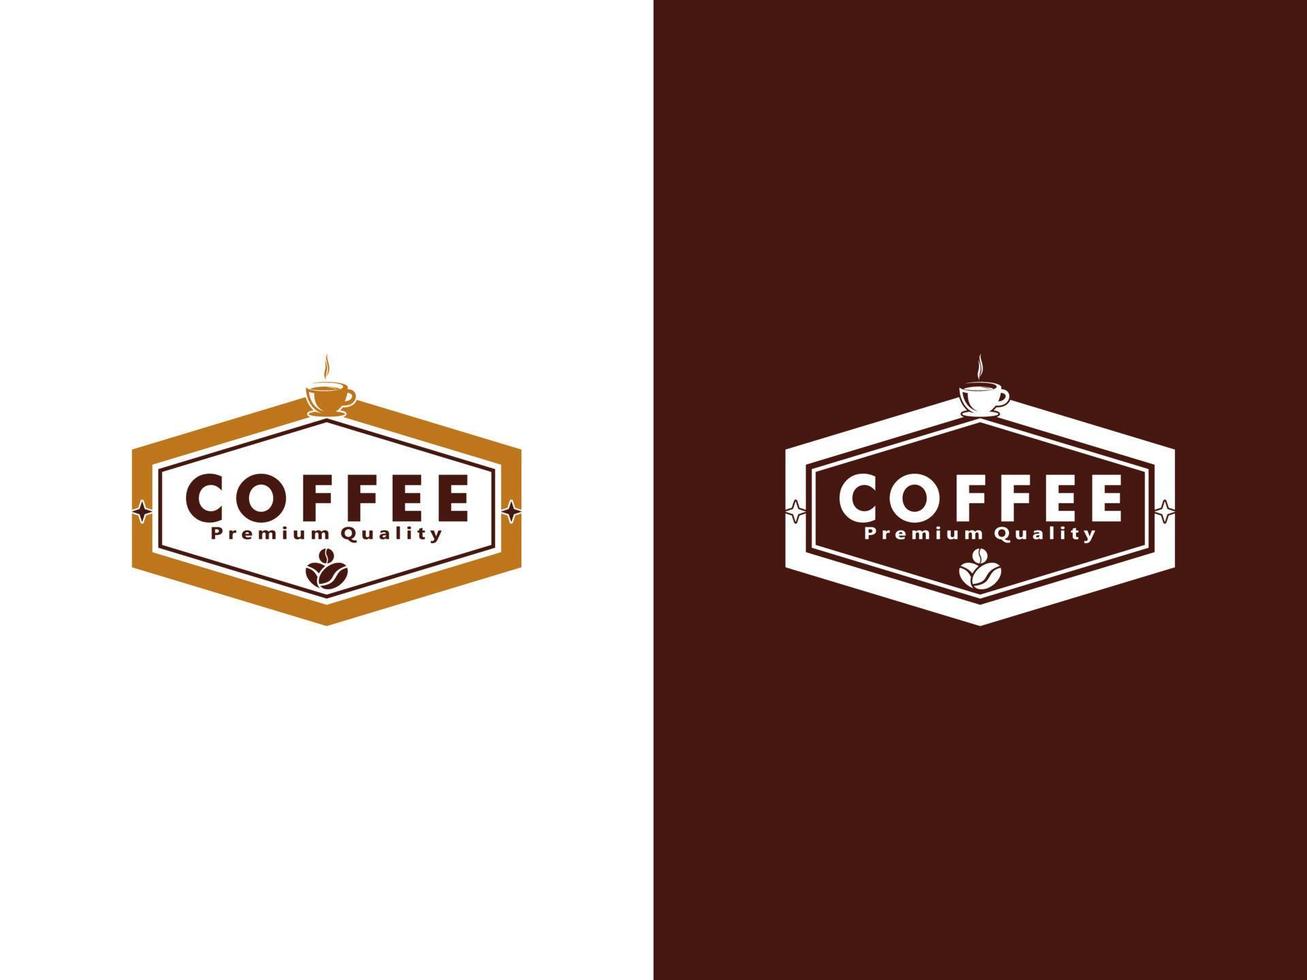 Coffee logo design template, Vector coffee logo for coffee shop and any business related to coffee.